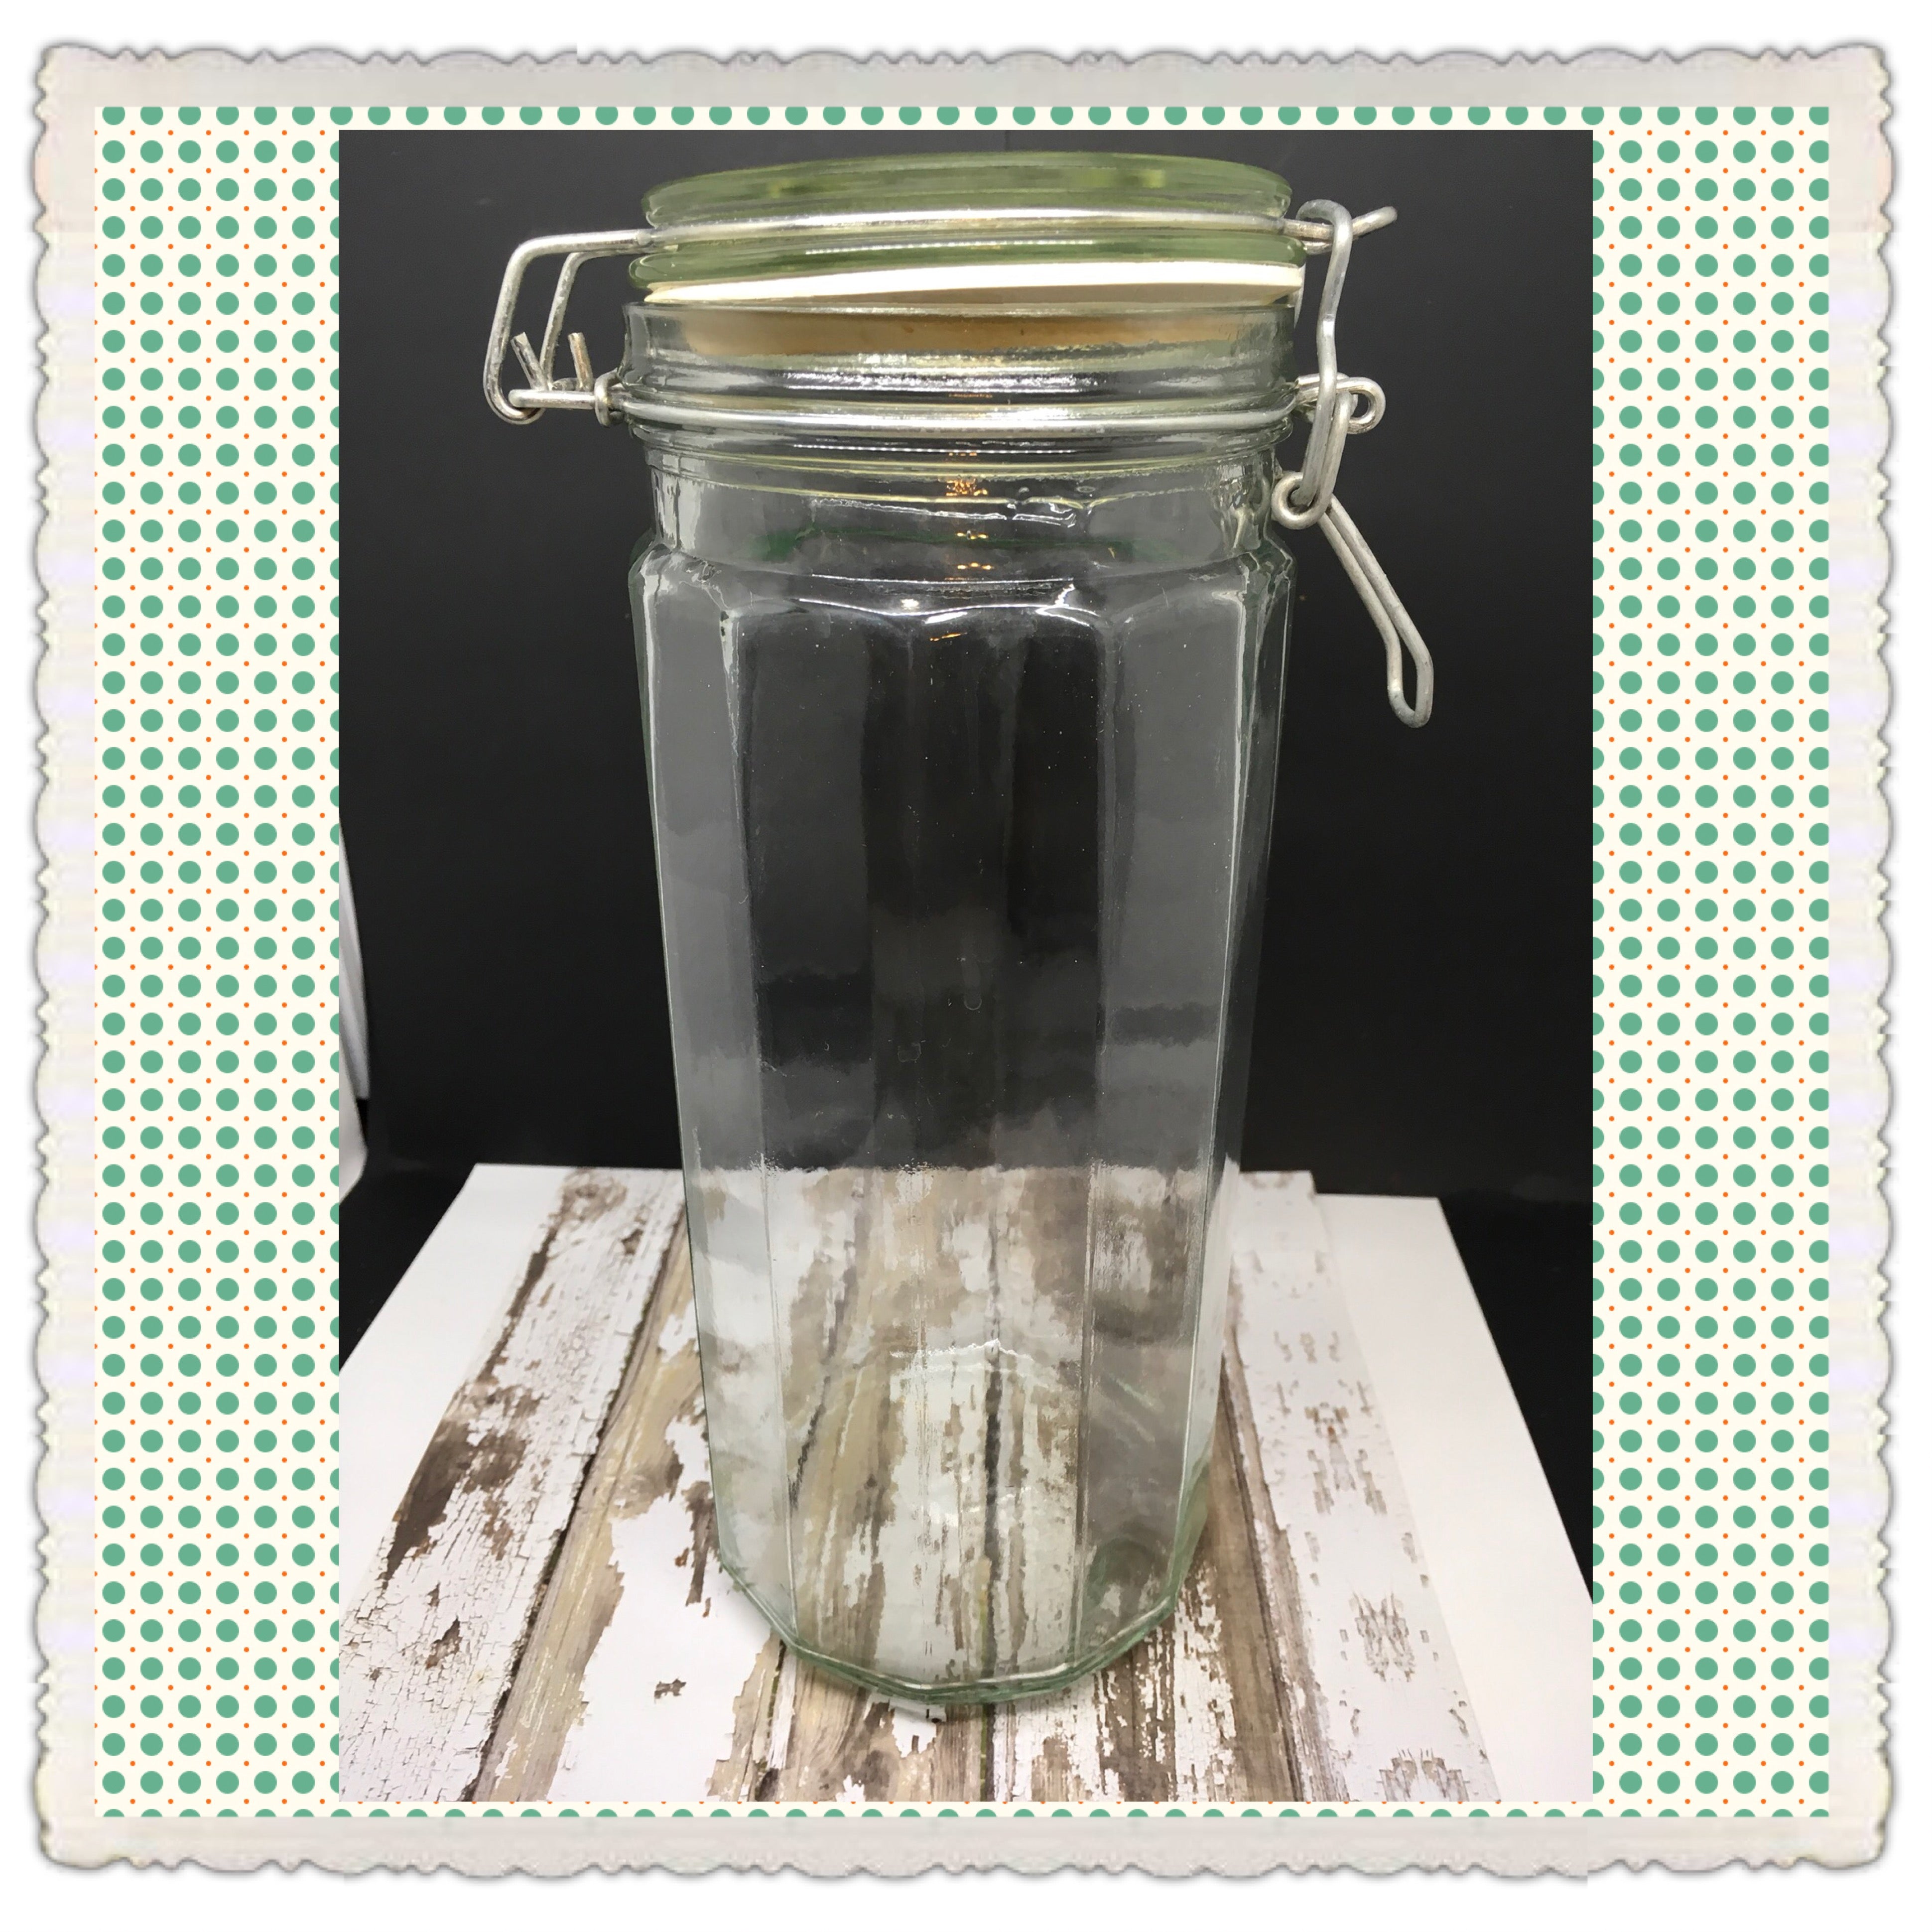 ZENS Glass Canisters with Glass Lids, Airtight Sealed 65.5 Fluid Ounce Tall  Storage Jars Spaghetti Containers